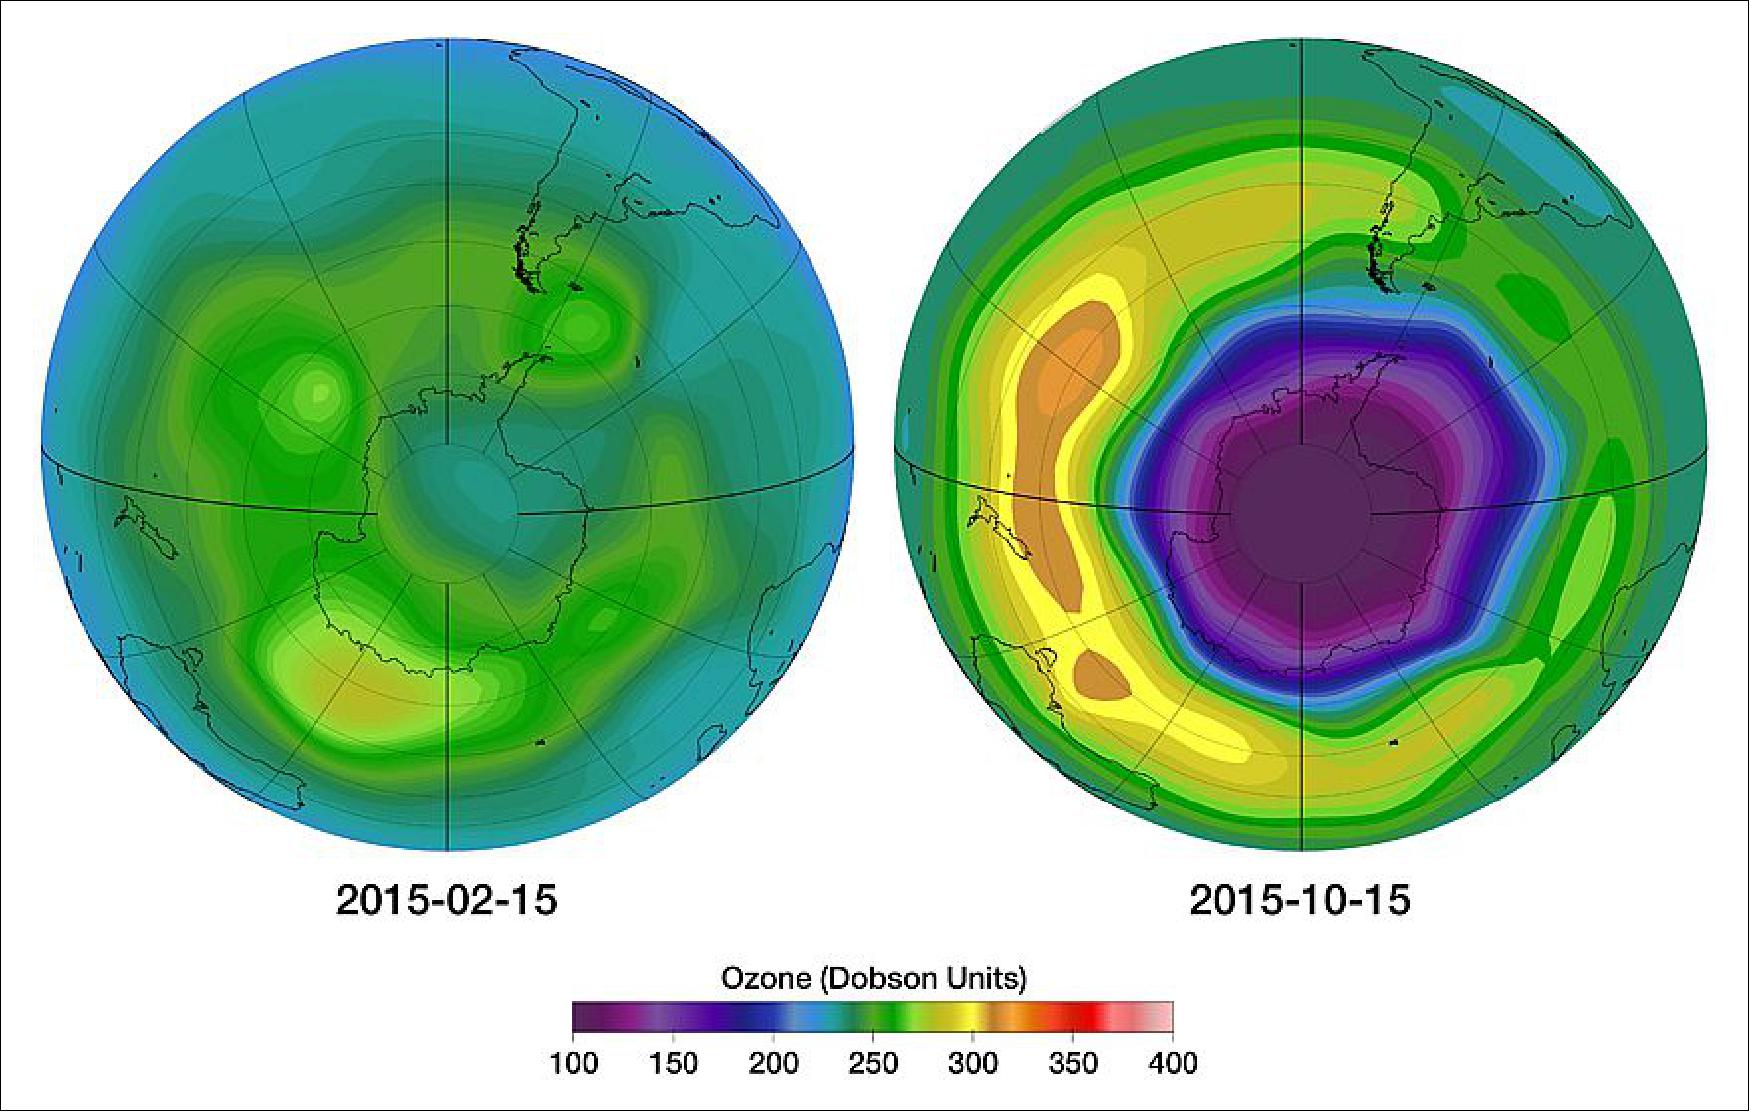 Figure 8: Typical seasonal variations of ozone concentration over the South Pole. The left image shows higher concentrations of ozone in February 2015, and the right image shows very low ozone concentrations, the "ozone hole," in October 2015 (image credit: Canadian Space Agency, University of Saskatchewan)